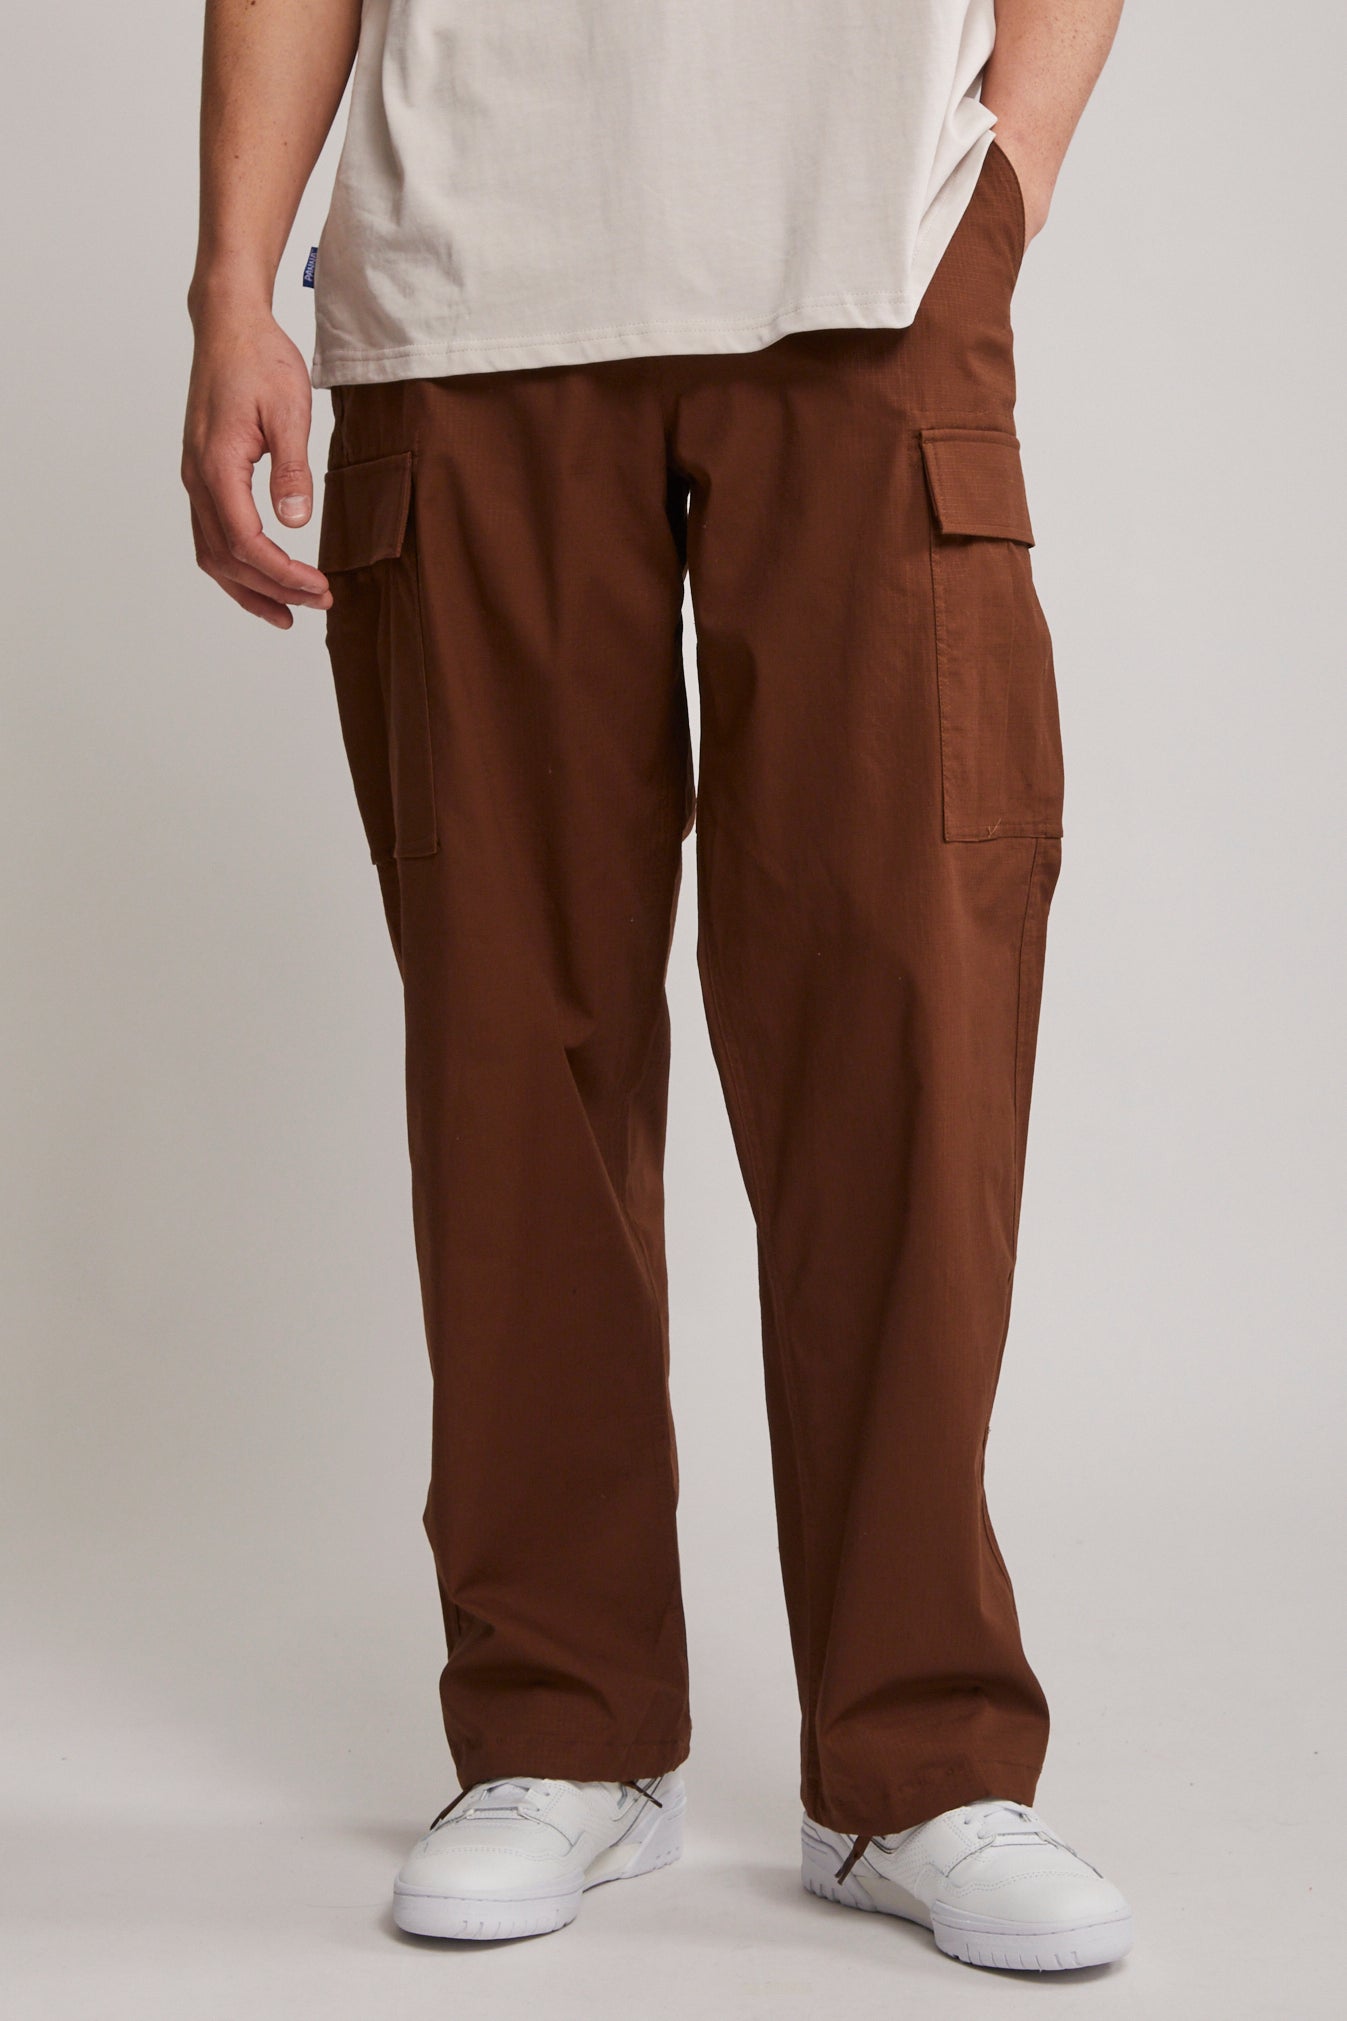 Mens Pants l Chinos, Denim Jeans, Cuffed Pants & more.